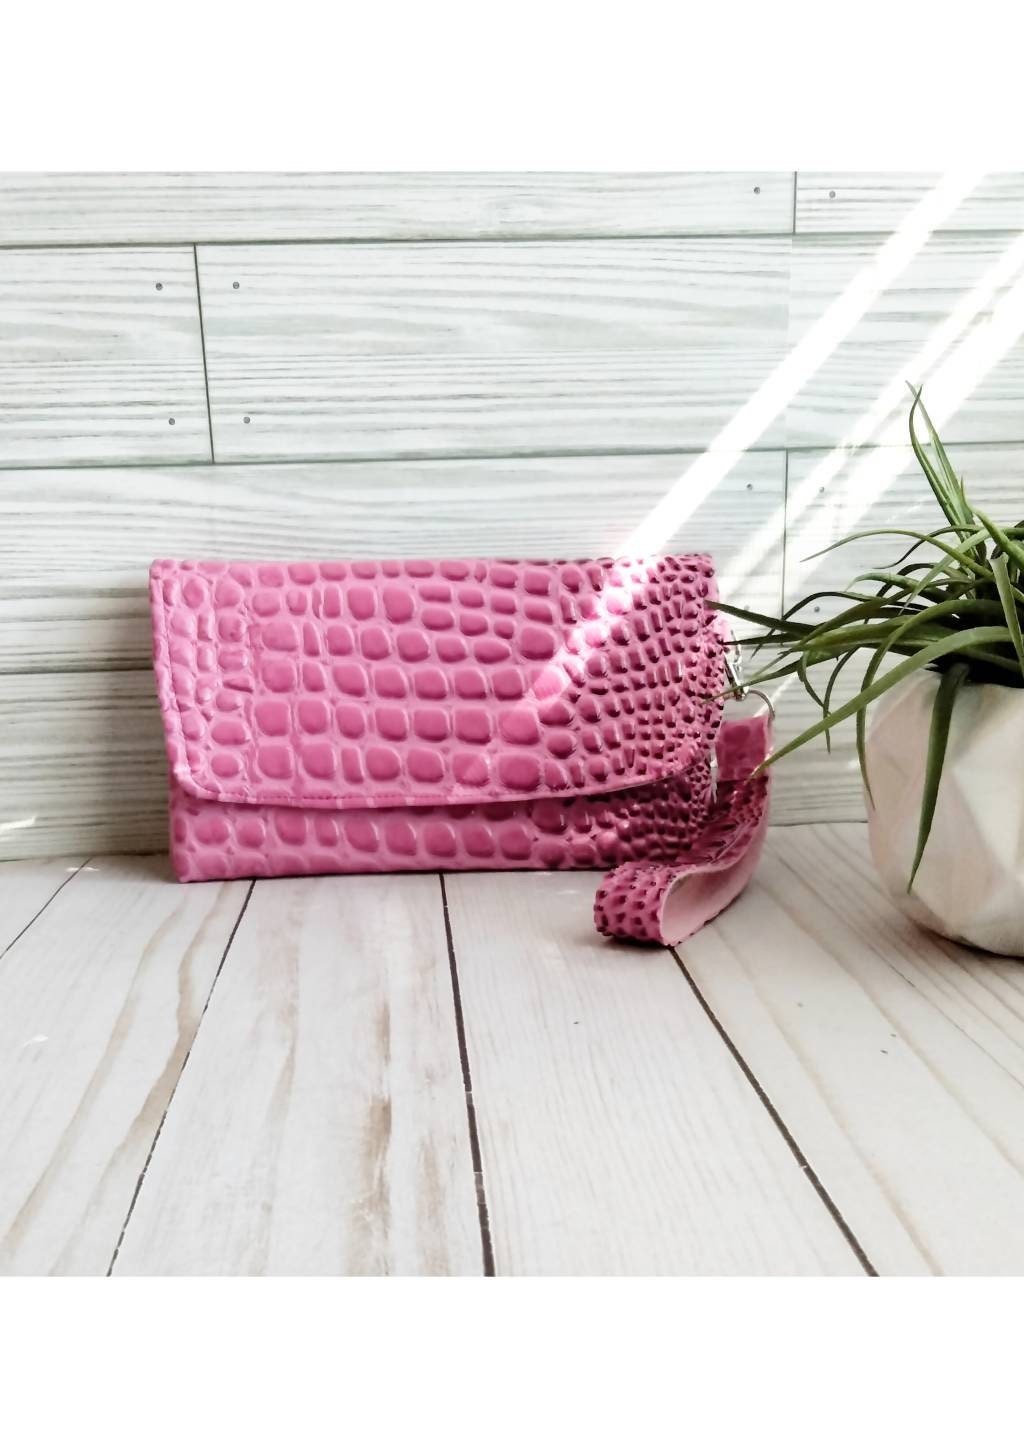 Pink Embossed Vegan Leather Clutch Cellphone Wallet